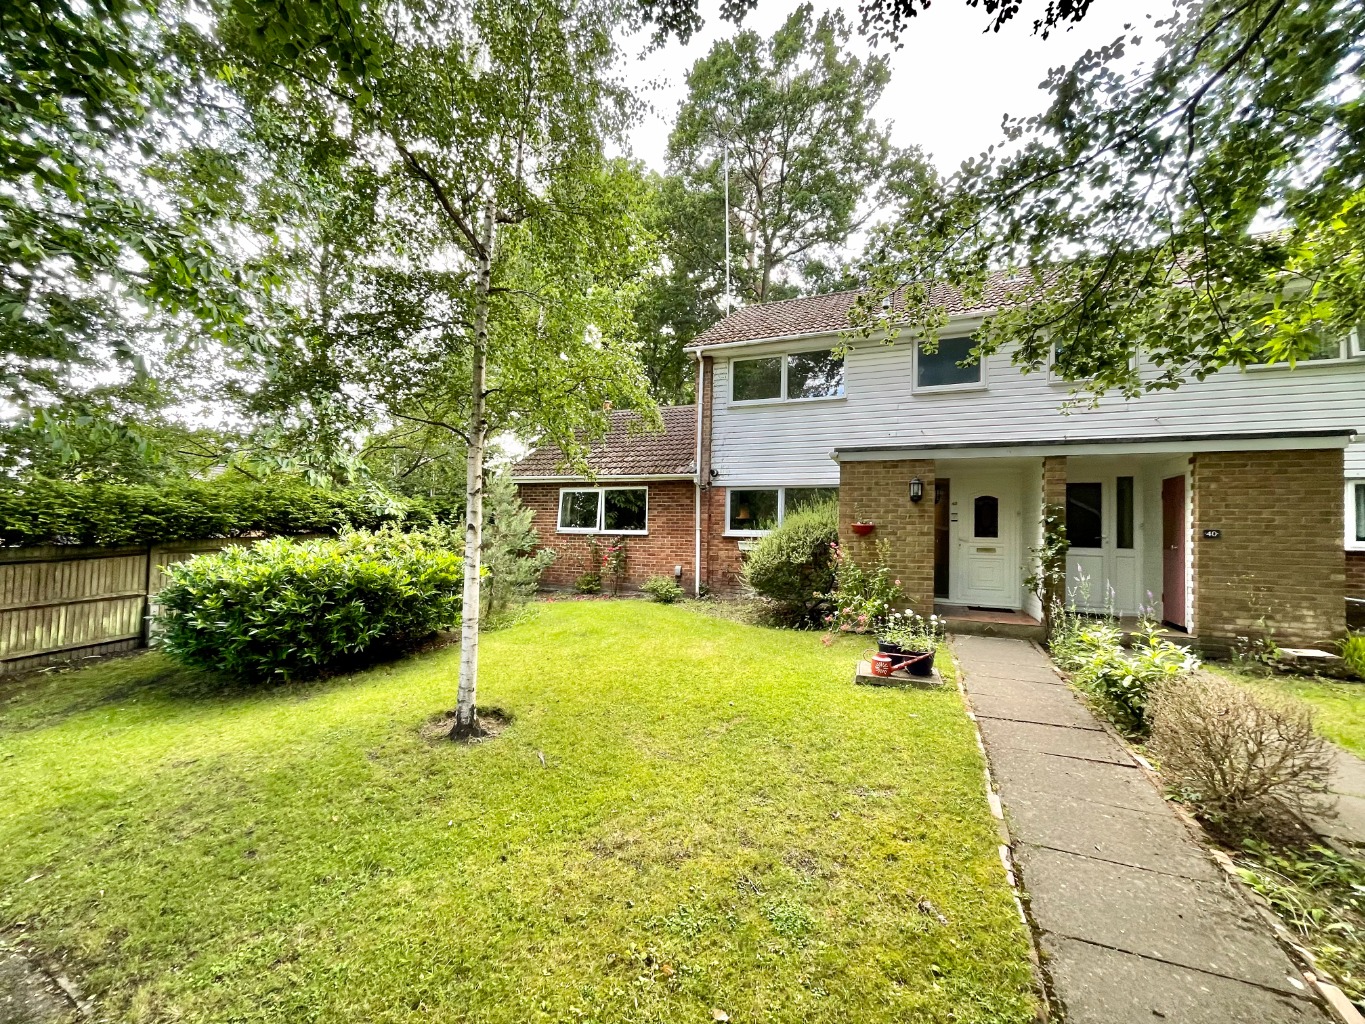 3 bed end of terrace house for sale in Troutbeck Walk, Camberley, GU15